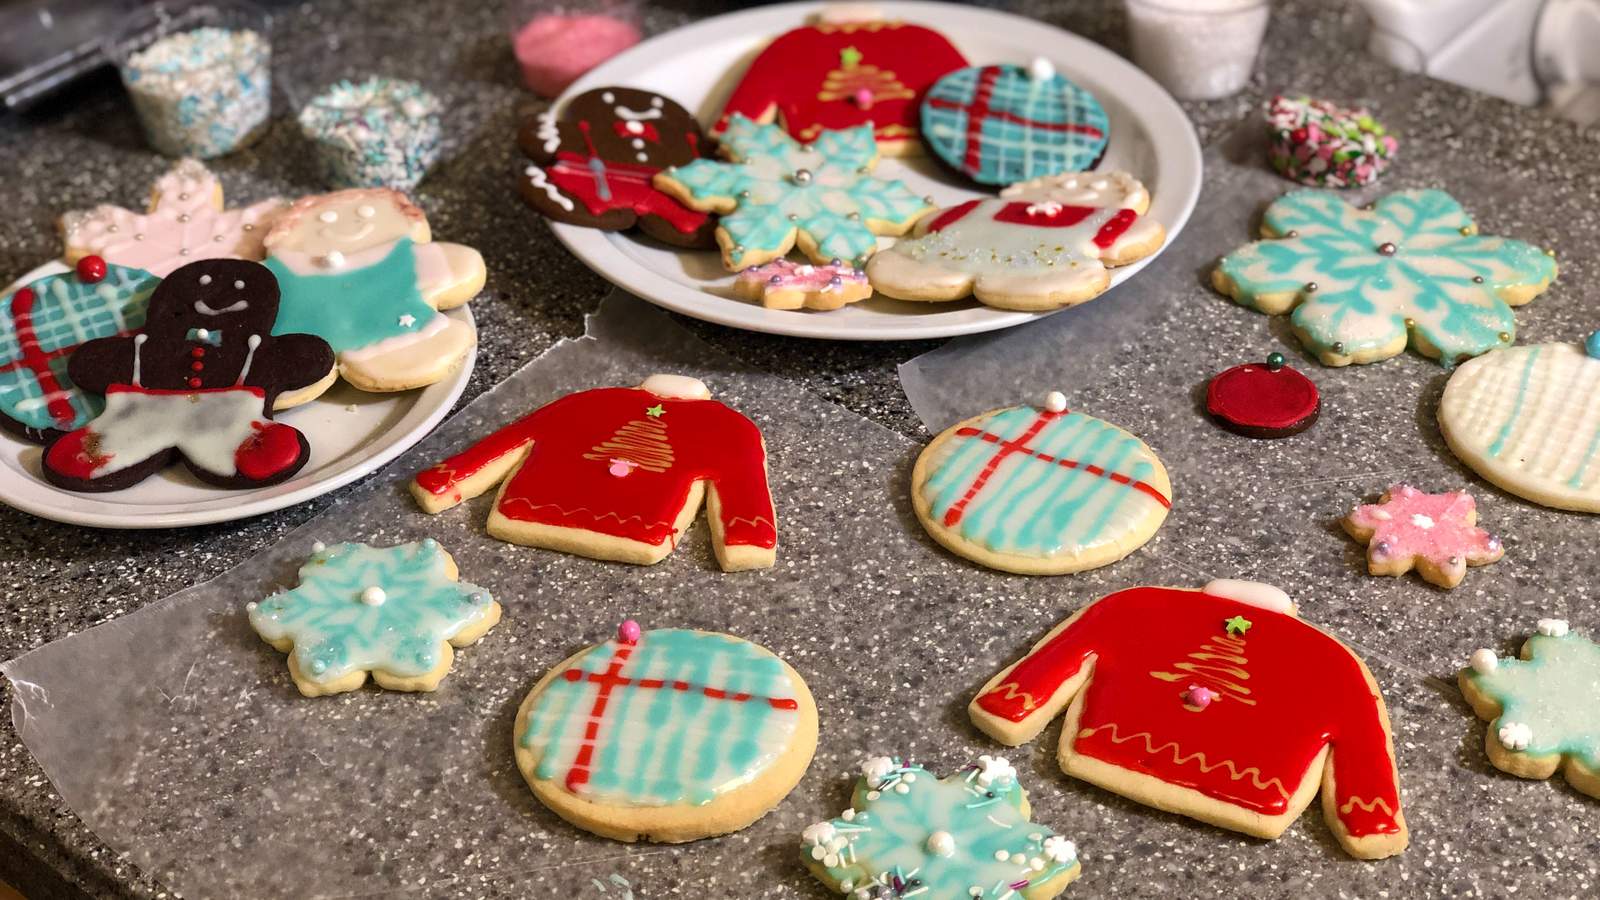 5 Tricks to decorate your Christmas cookies like a pro